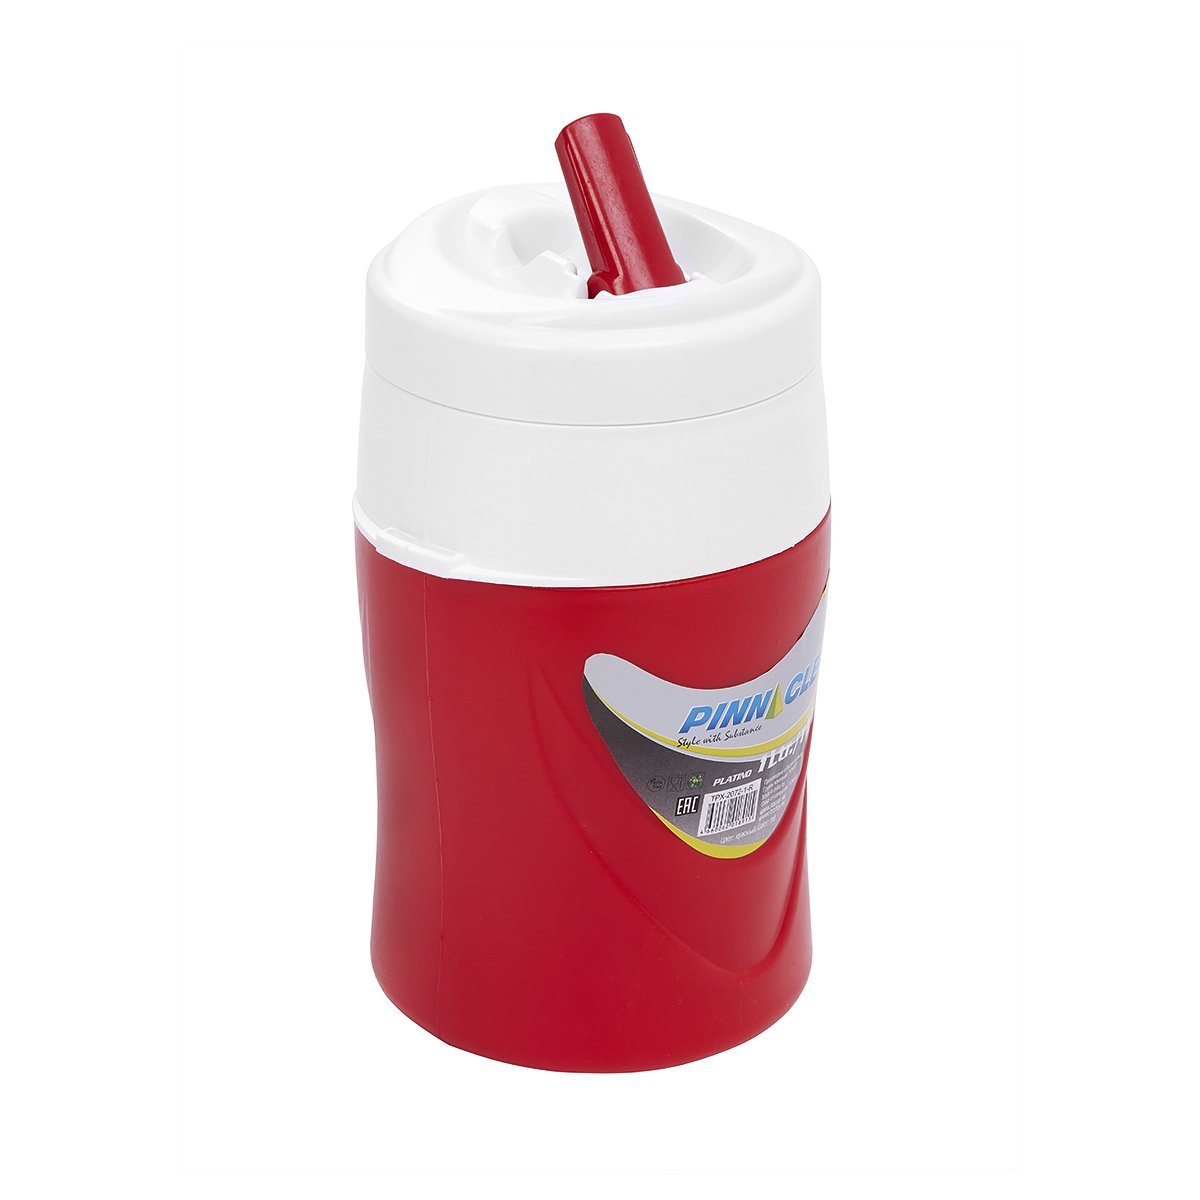 Platino Portable Beverage Cooler Jug for Outdoors and School, 1 qt is equipped with a straw lid and adjustable shoulder strap. Red color